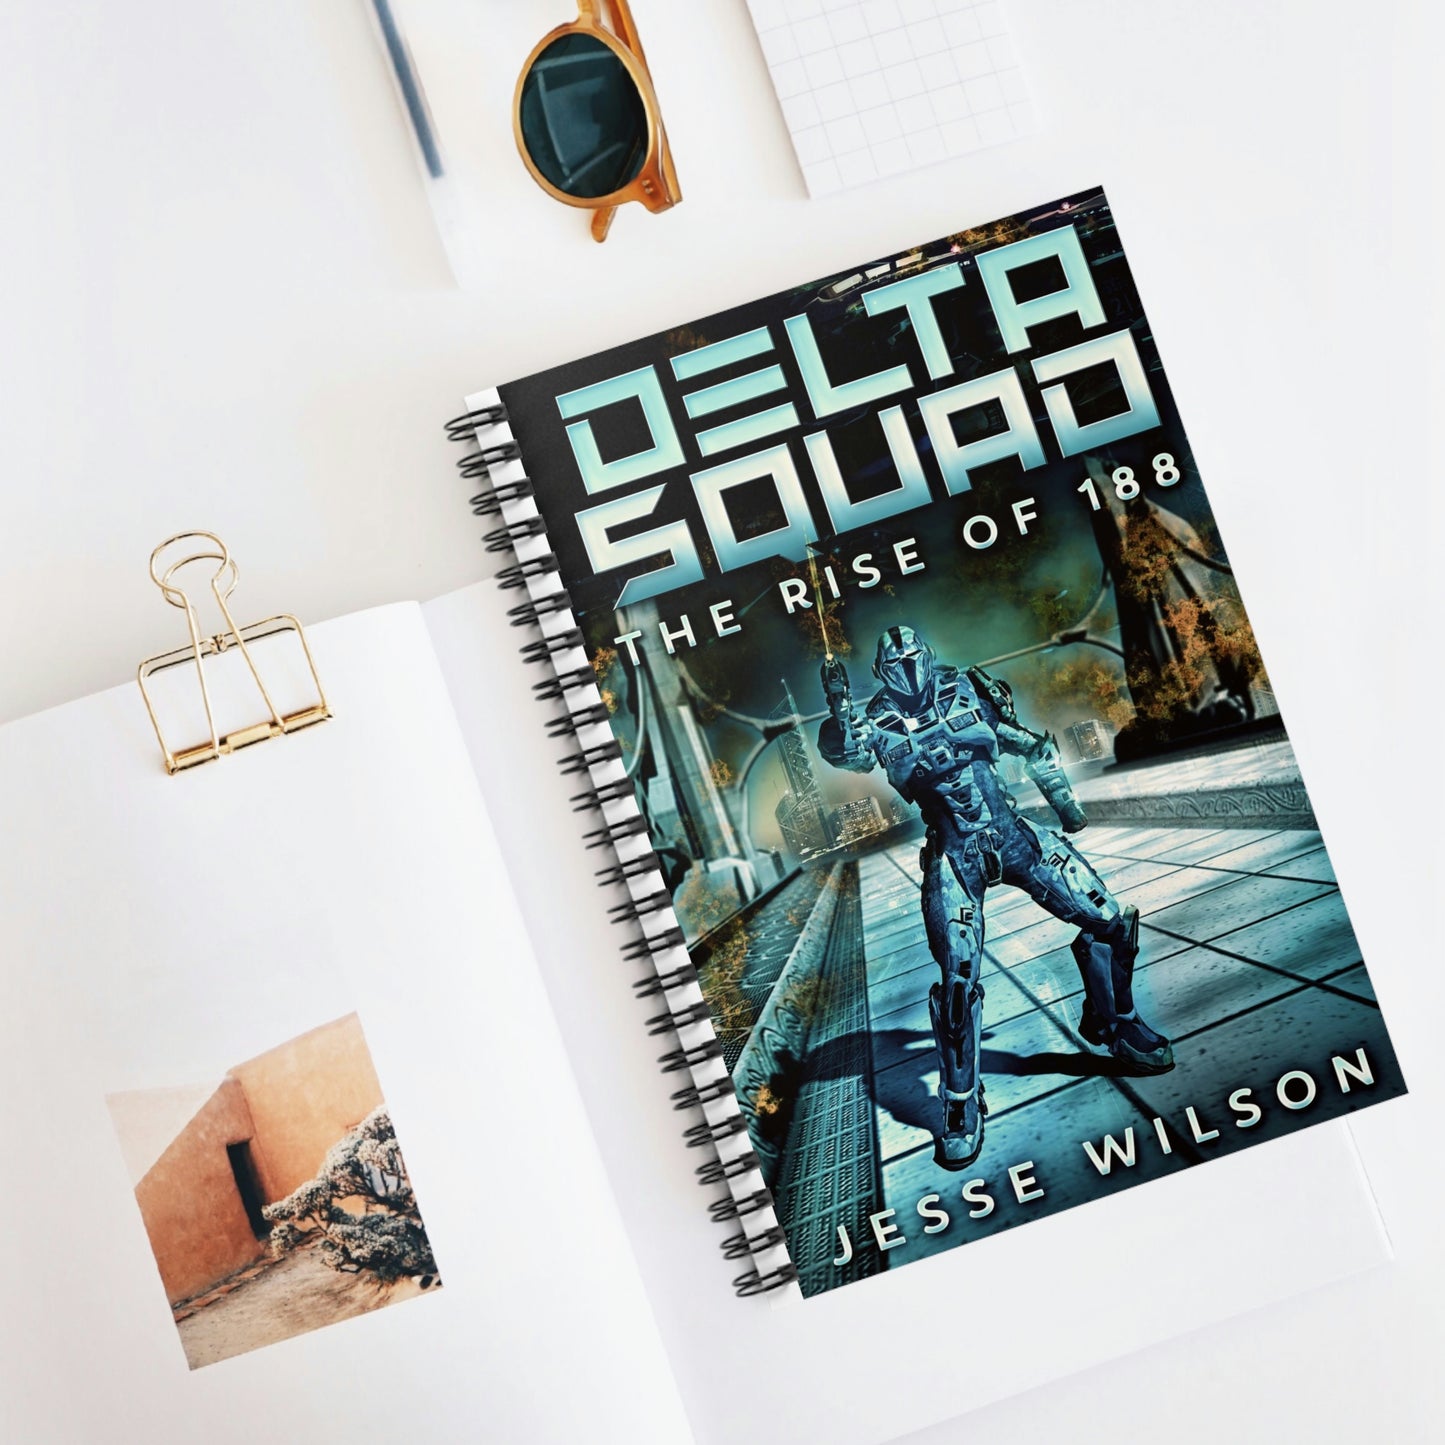 Delta Squad - The Rise Of 188 - Spiral Notebook